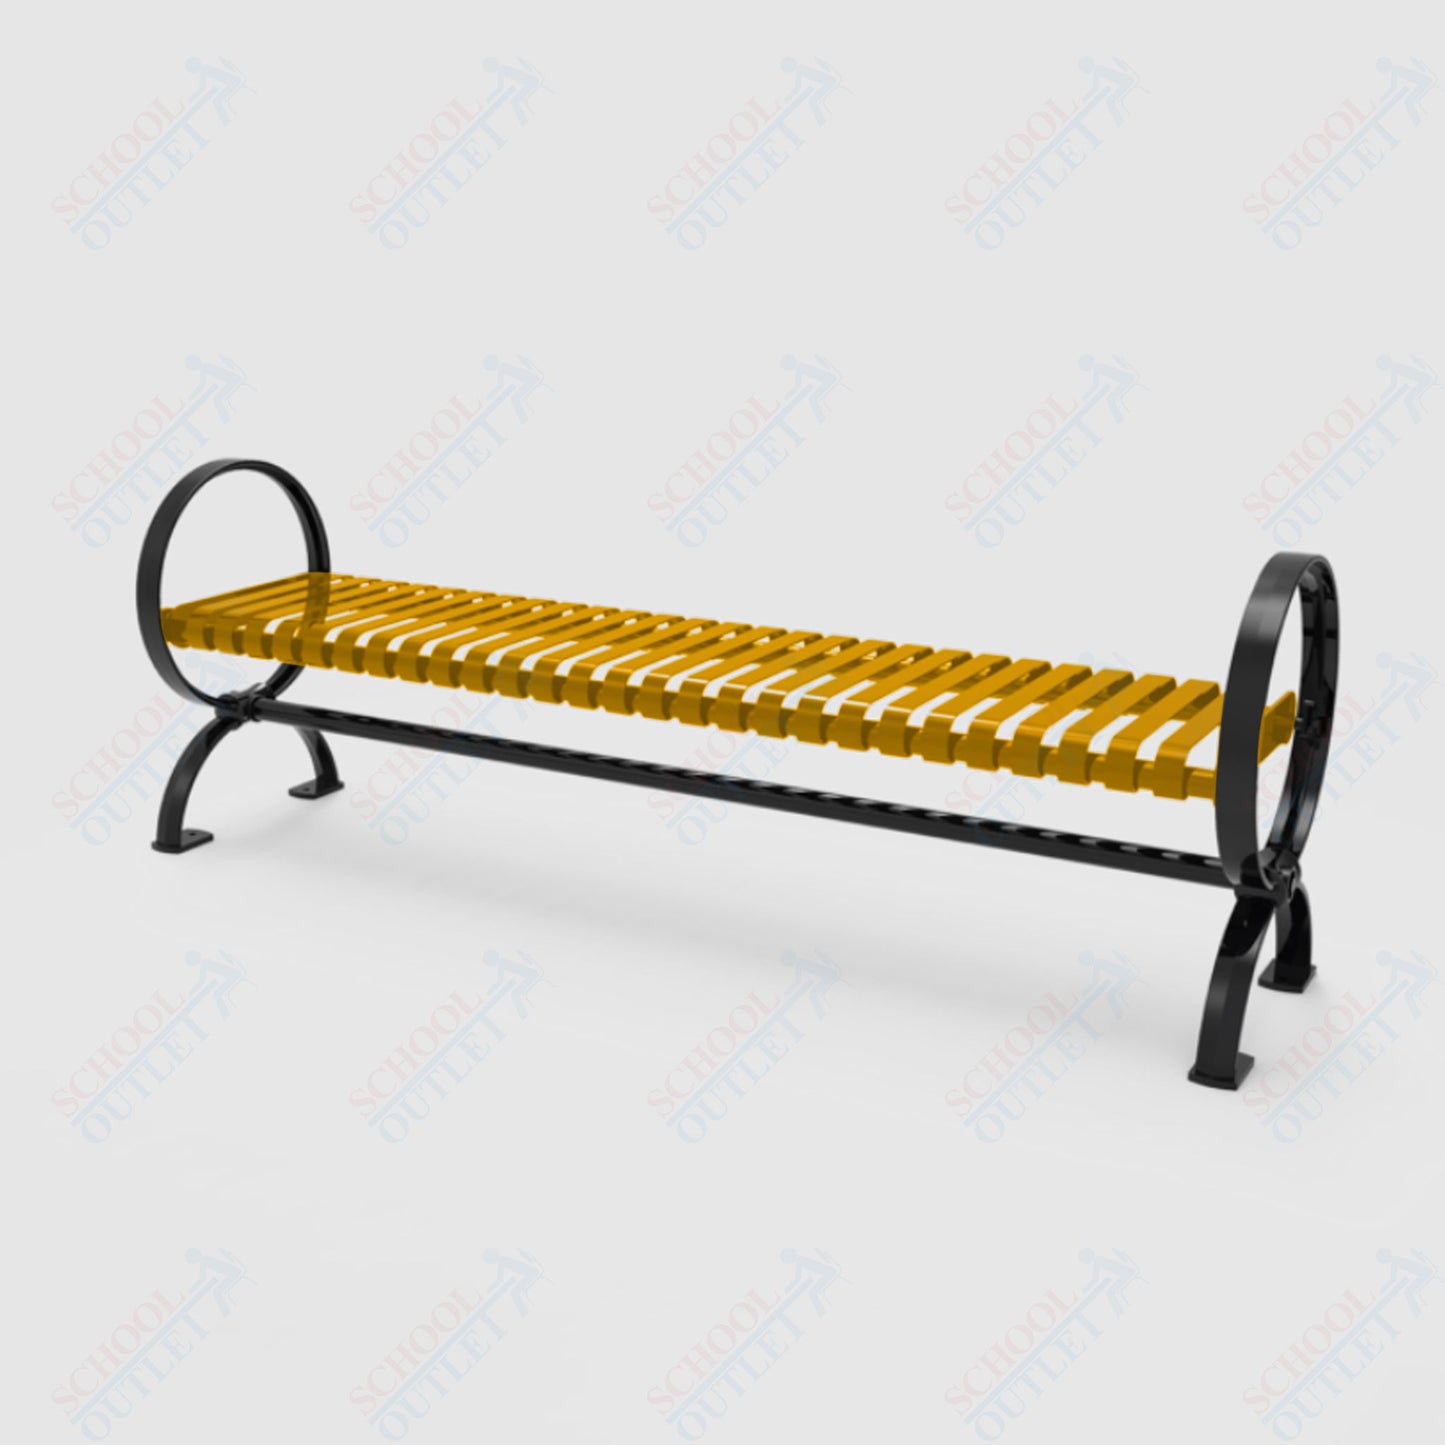 MyTcoat - Skyline Outdoor Bench with Arched Back - Portable or Surface Mount 4' L (MYT-BSL04-O-57)